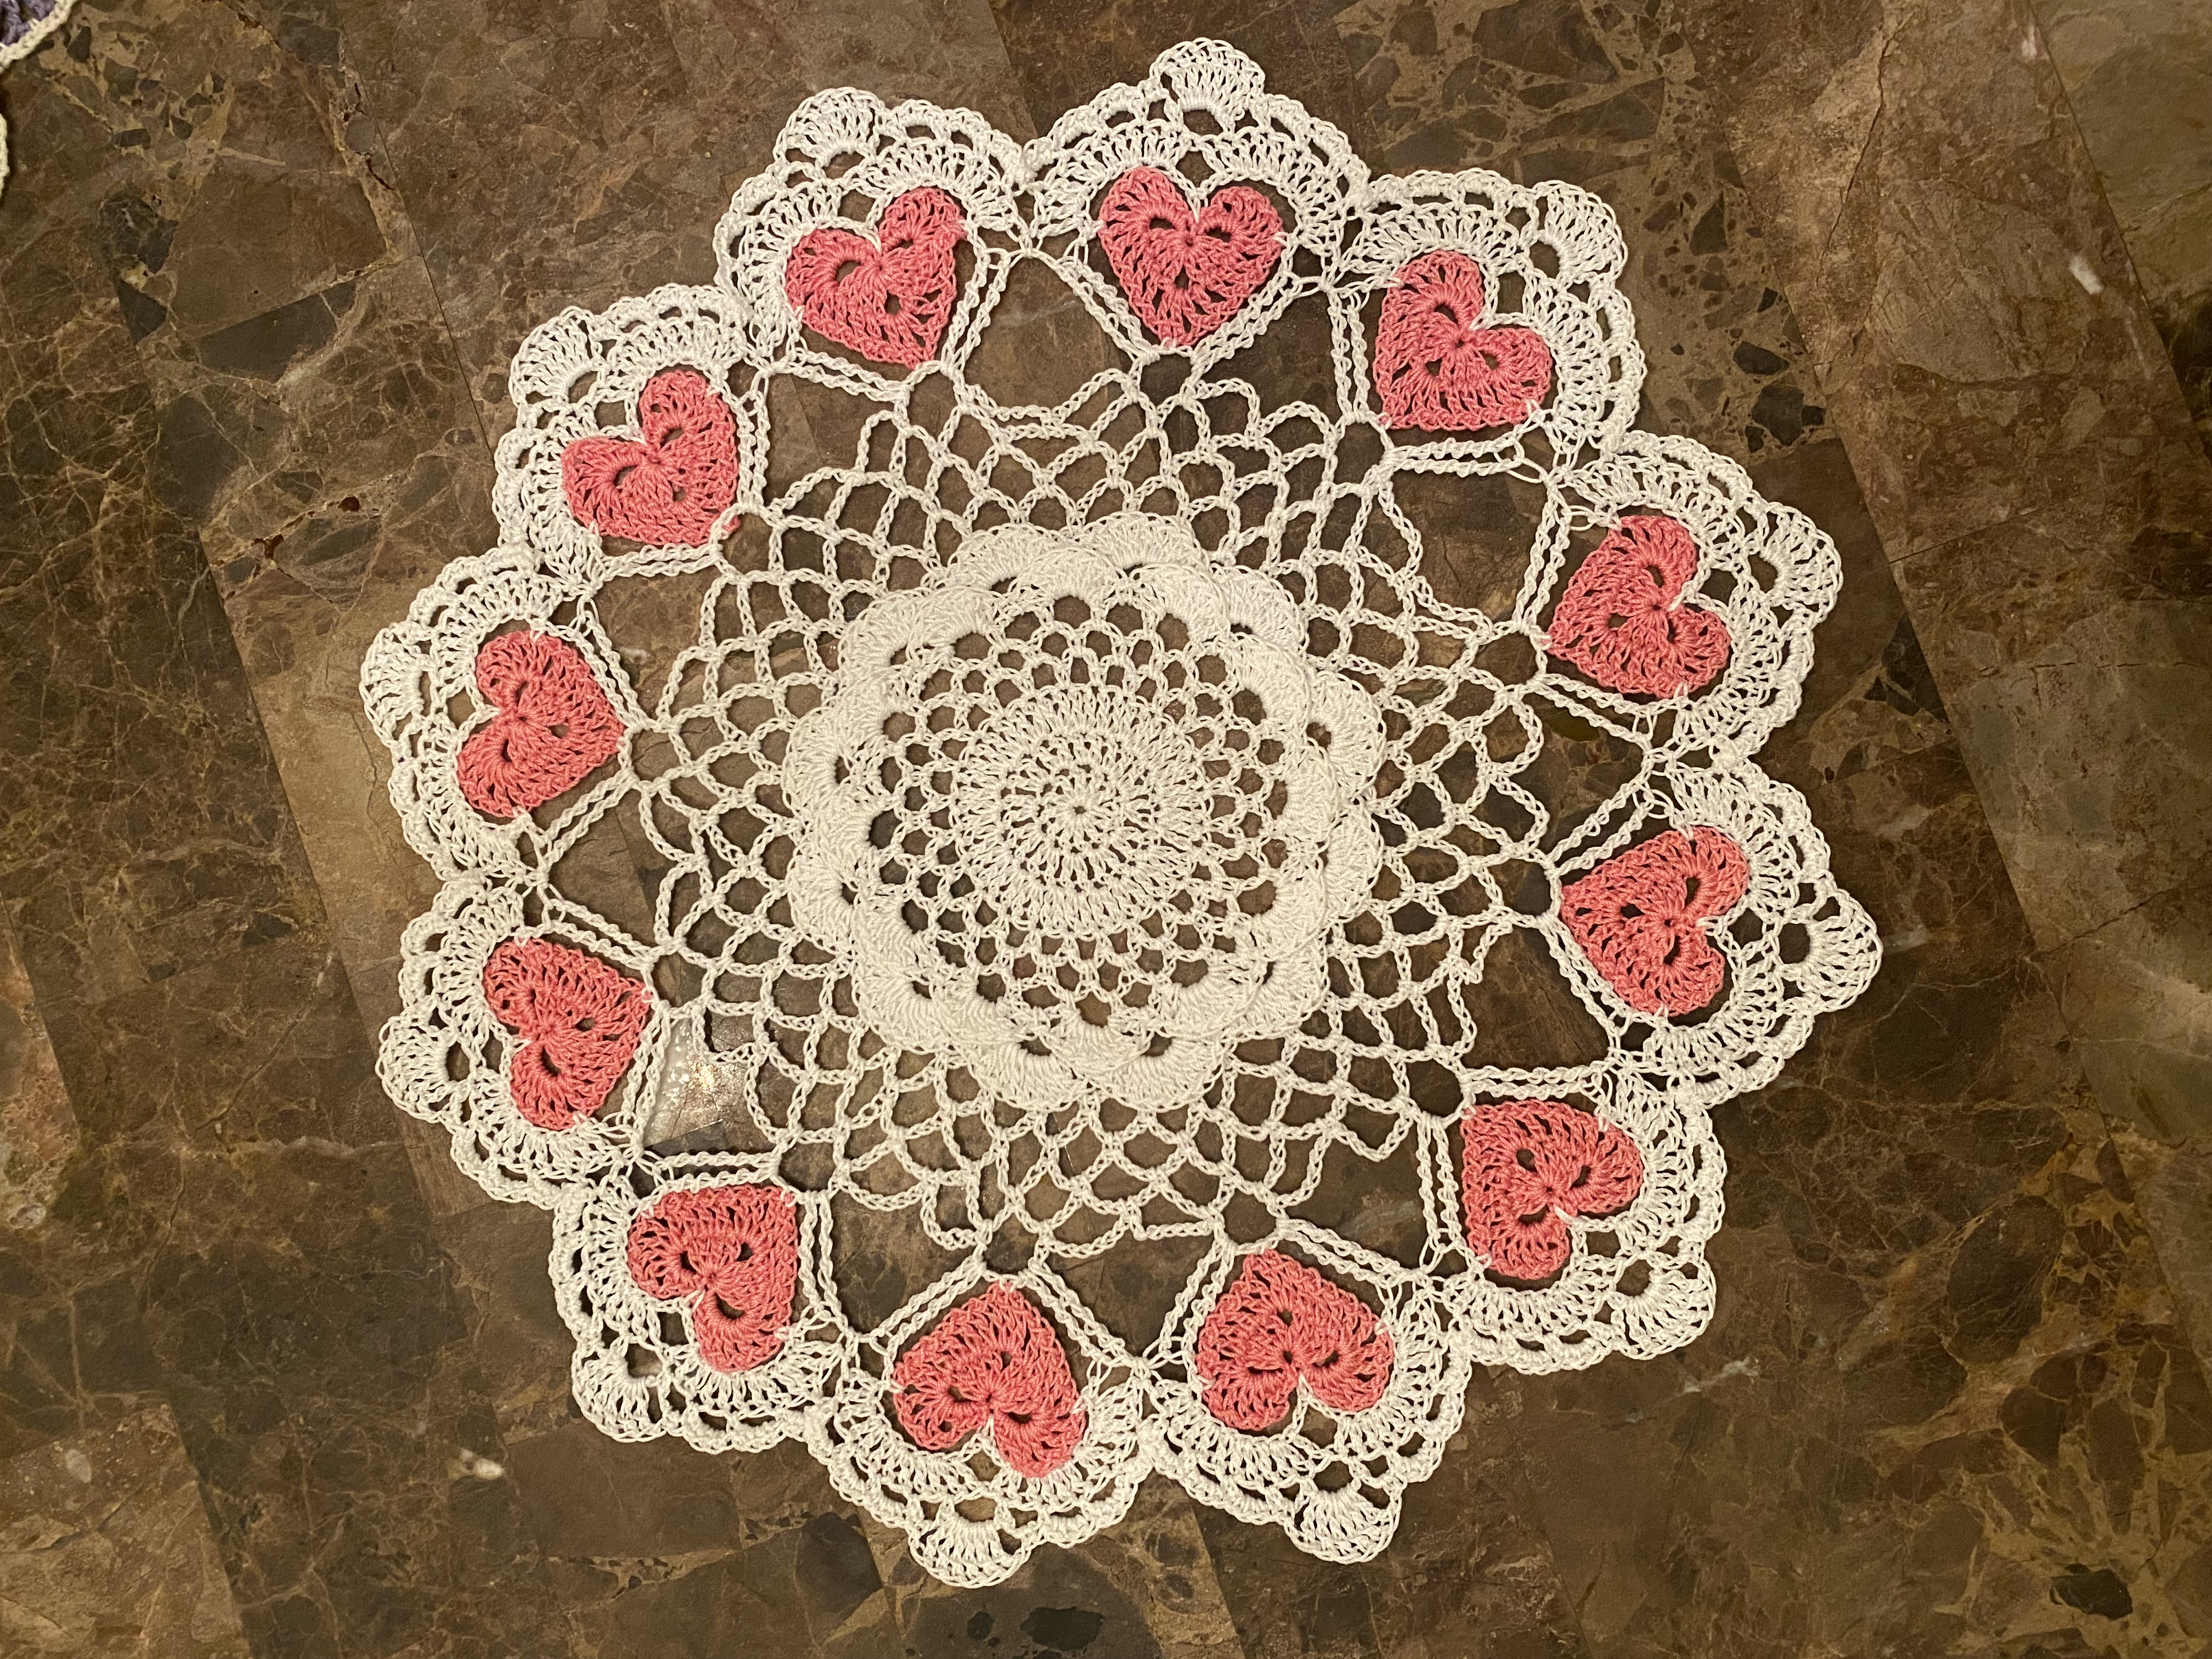 Pastry Tek Red Paper Doilies - Lace - 12 inch x 12 inch - 100 Count Box